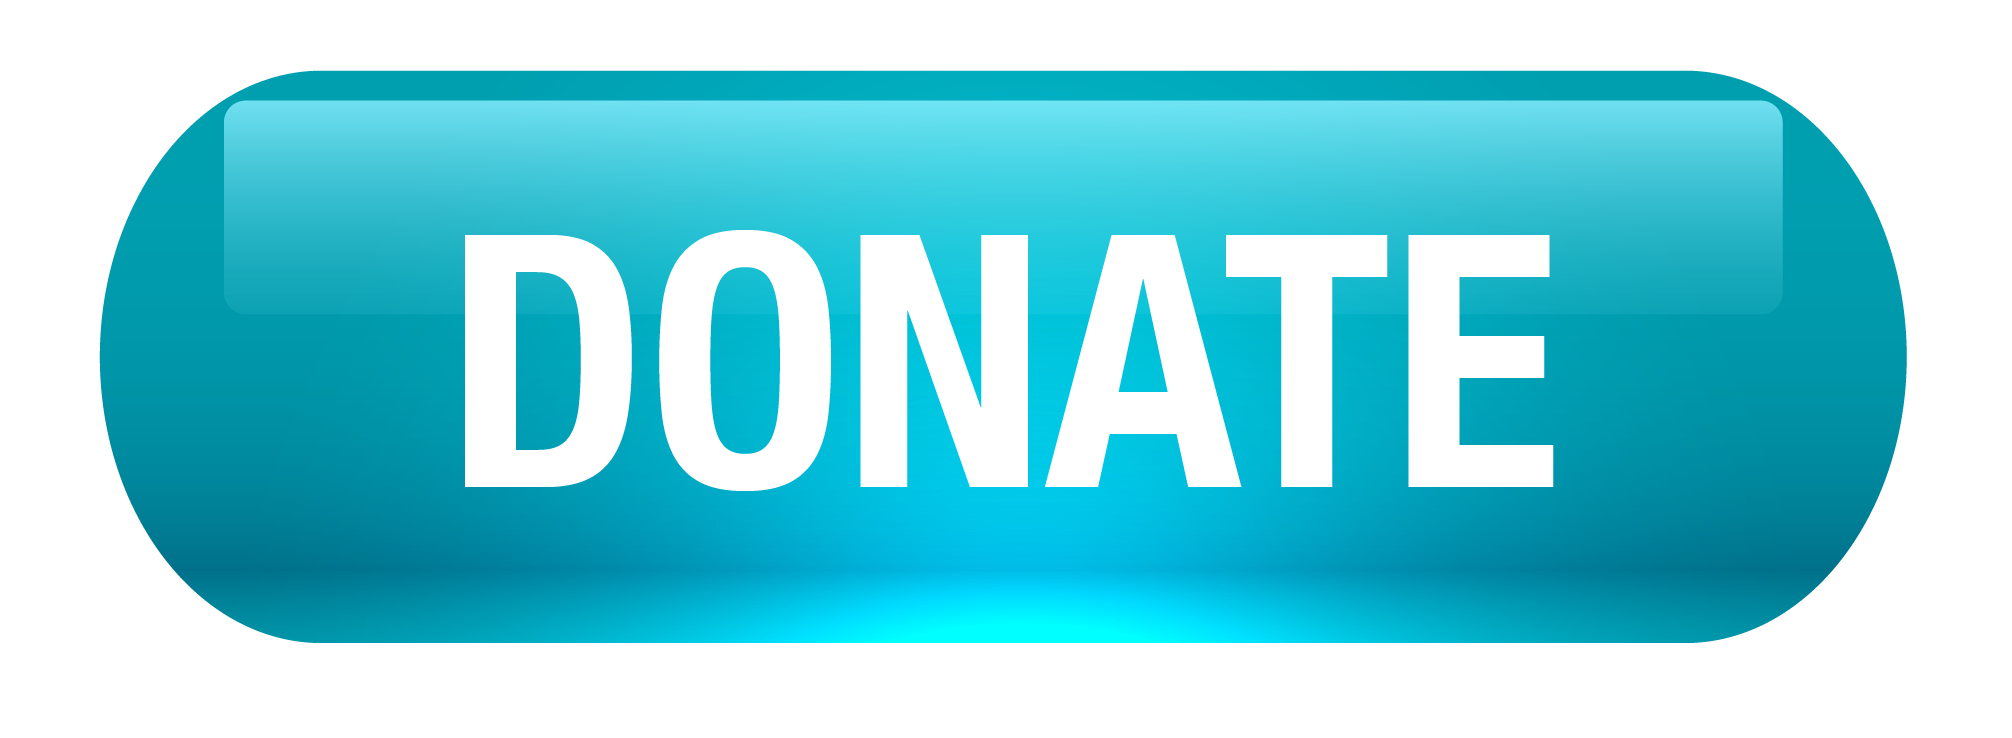 Donate Button PNG Image HD